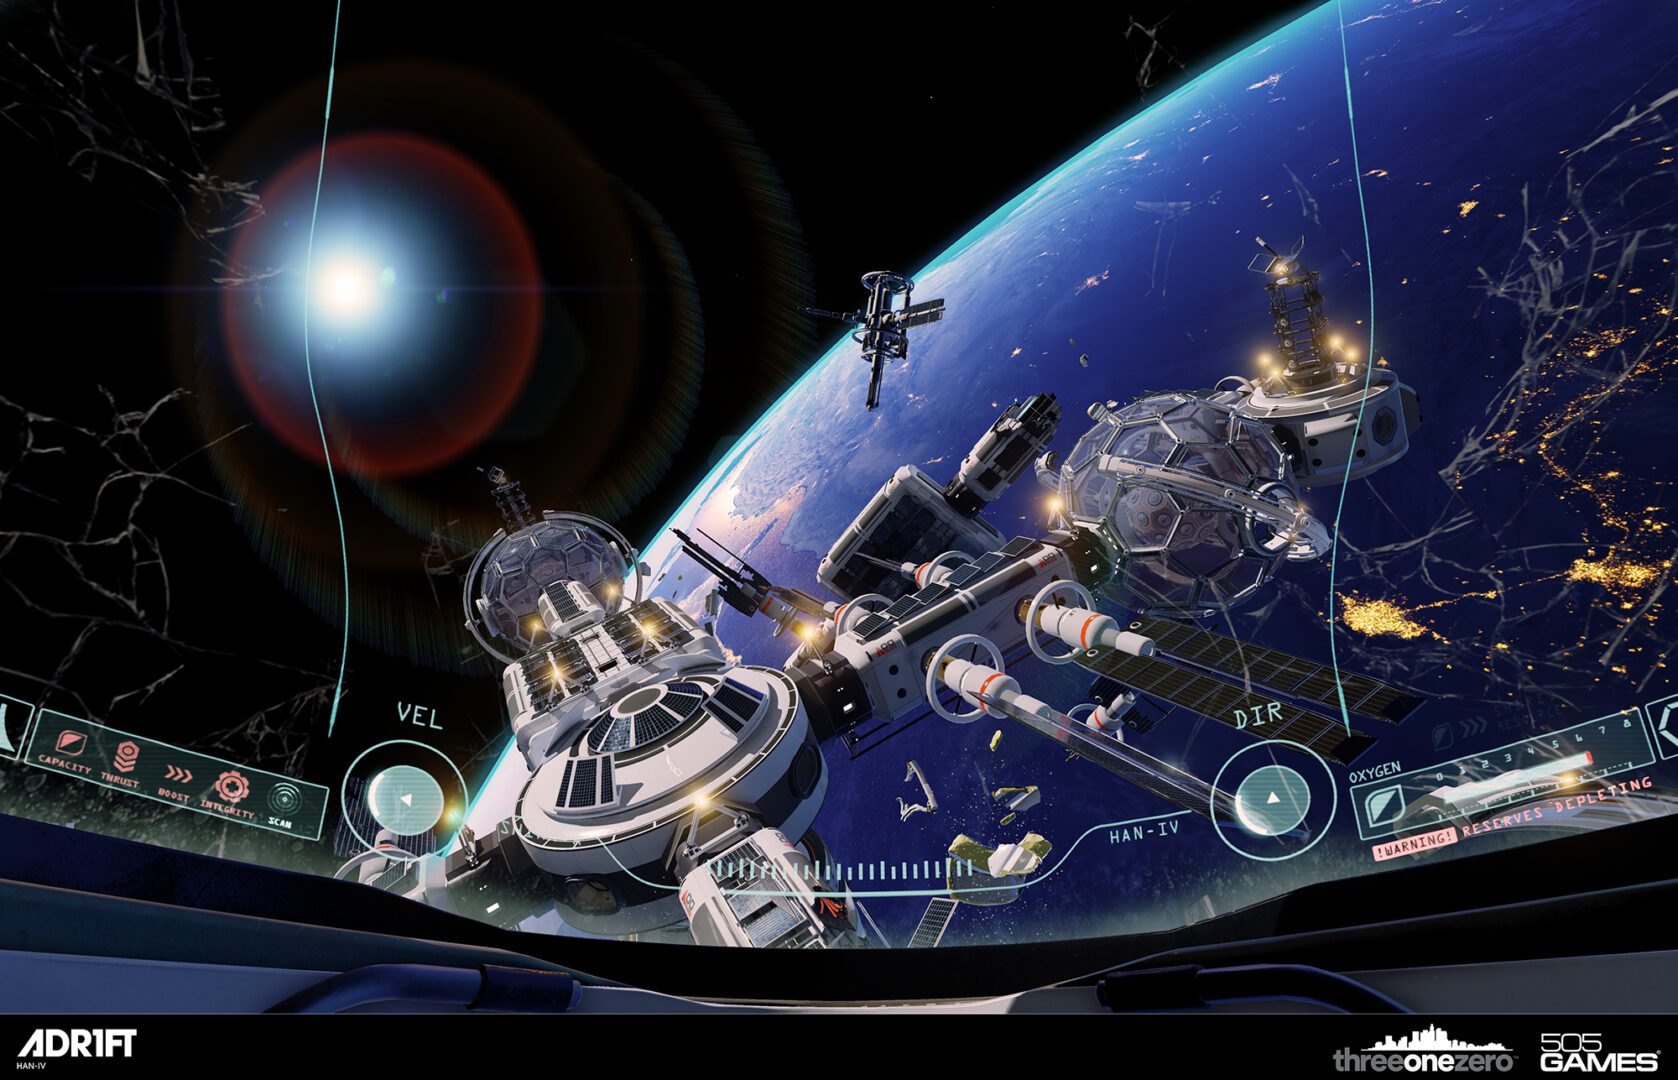 Adr1ft Hands-On